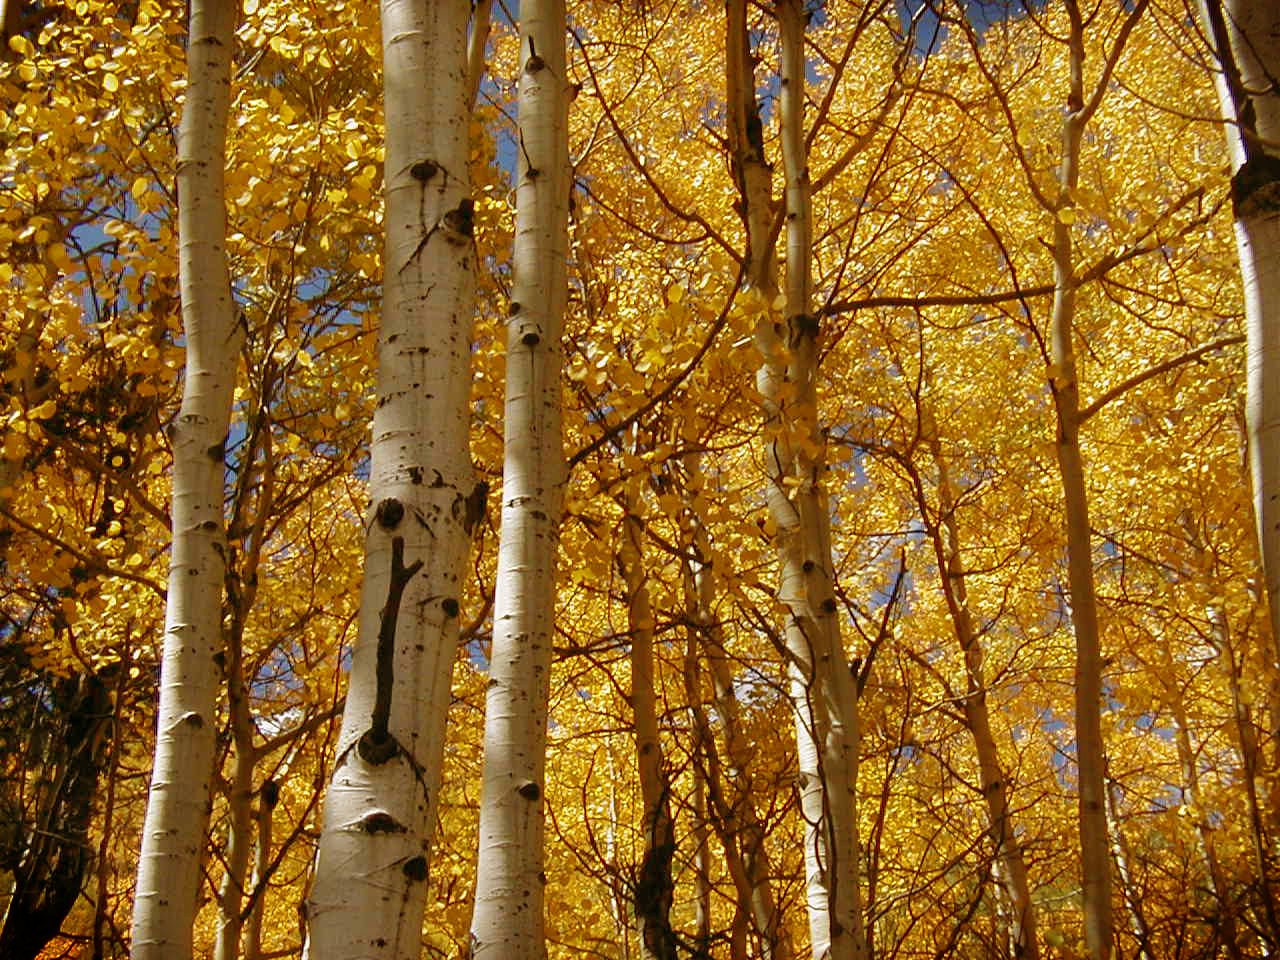 an upward view of several trunks of trees with yellow leaves